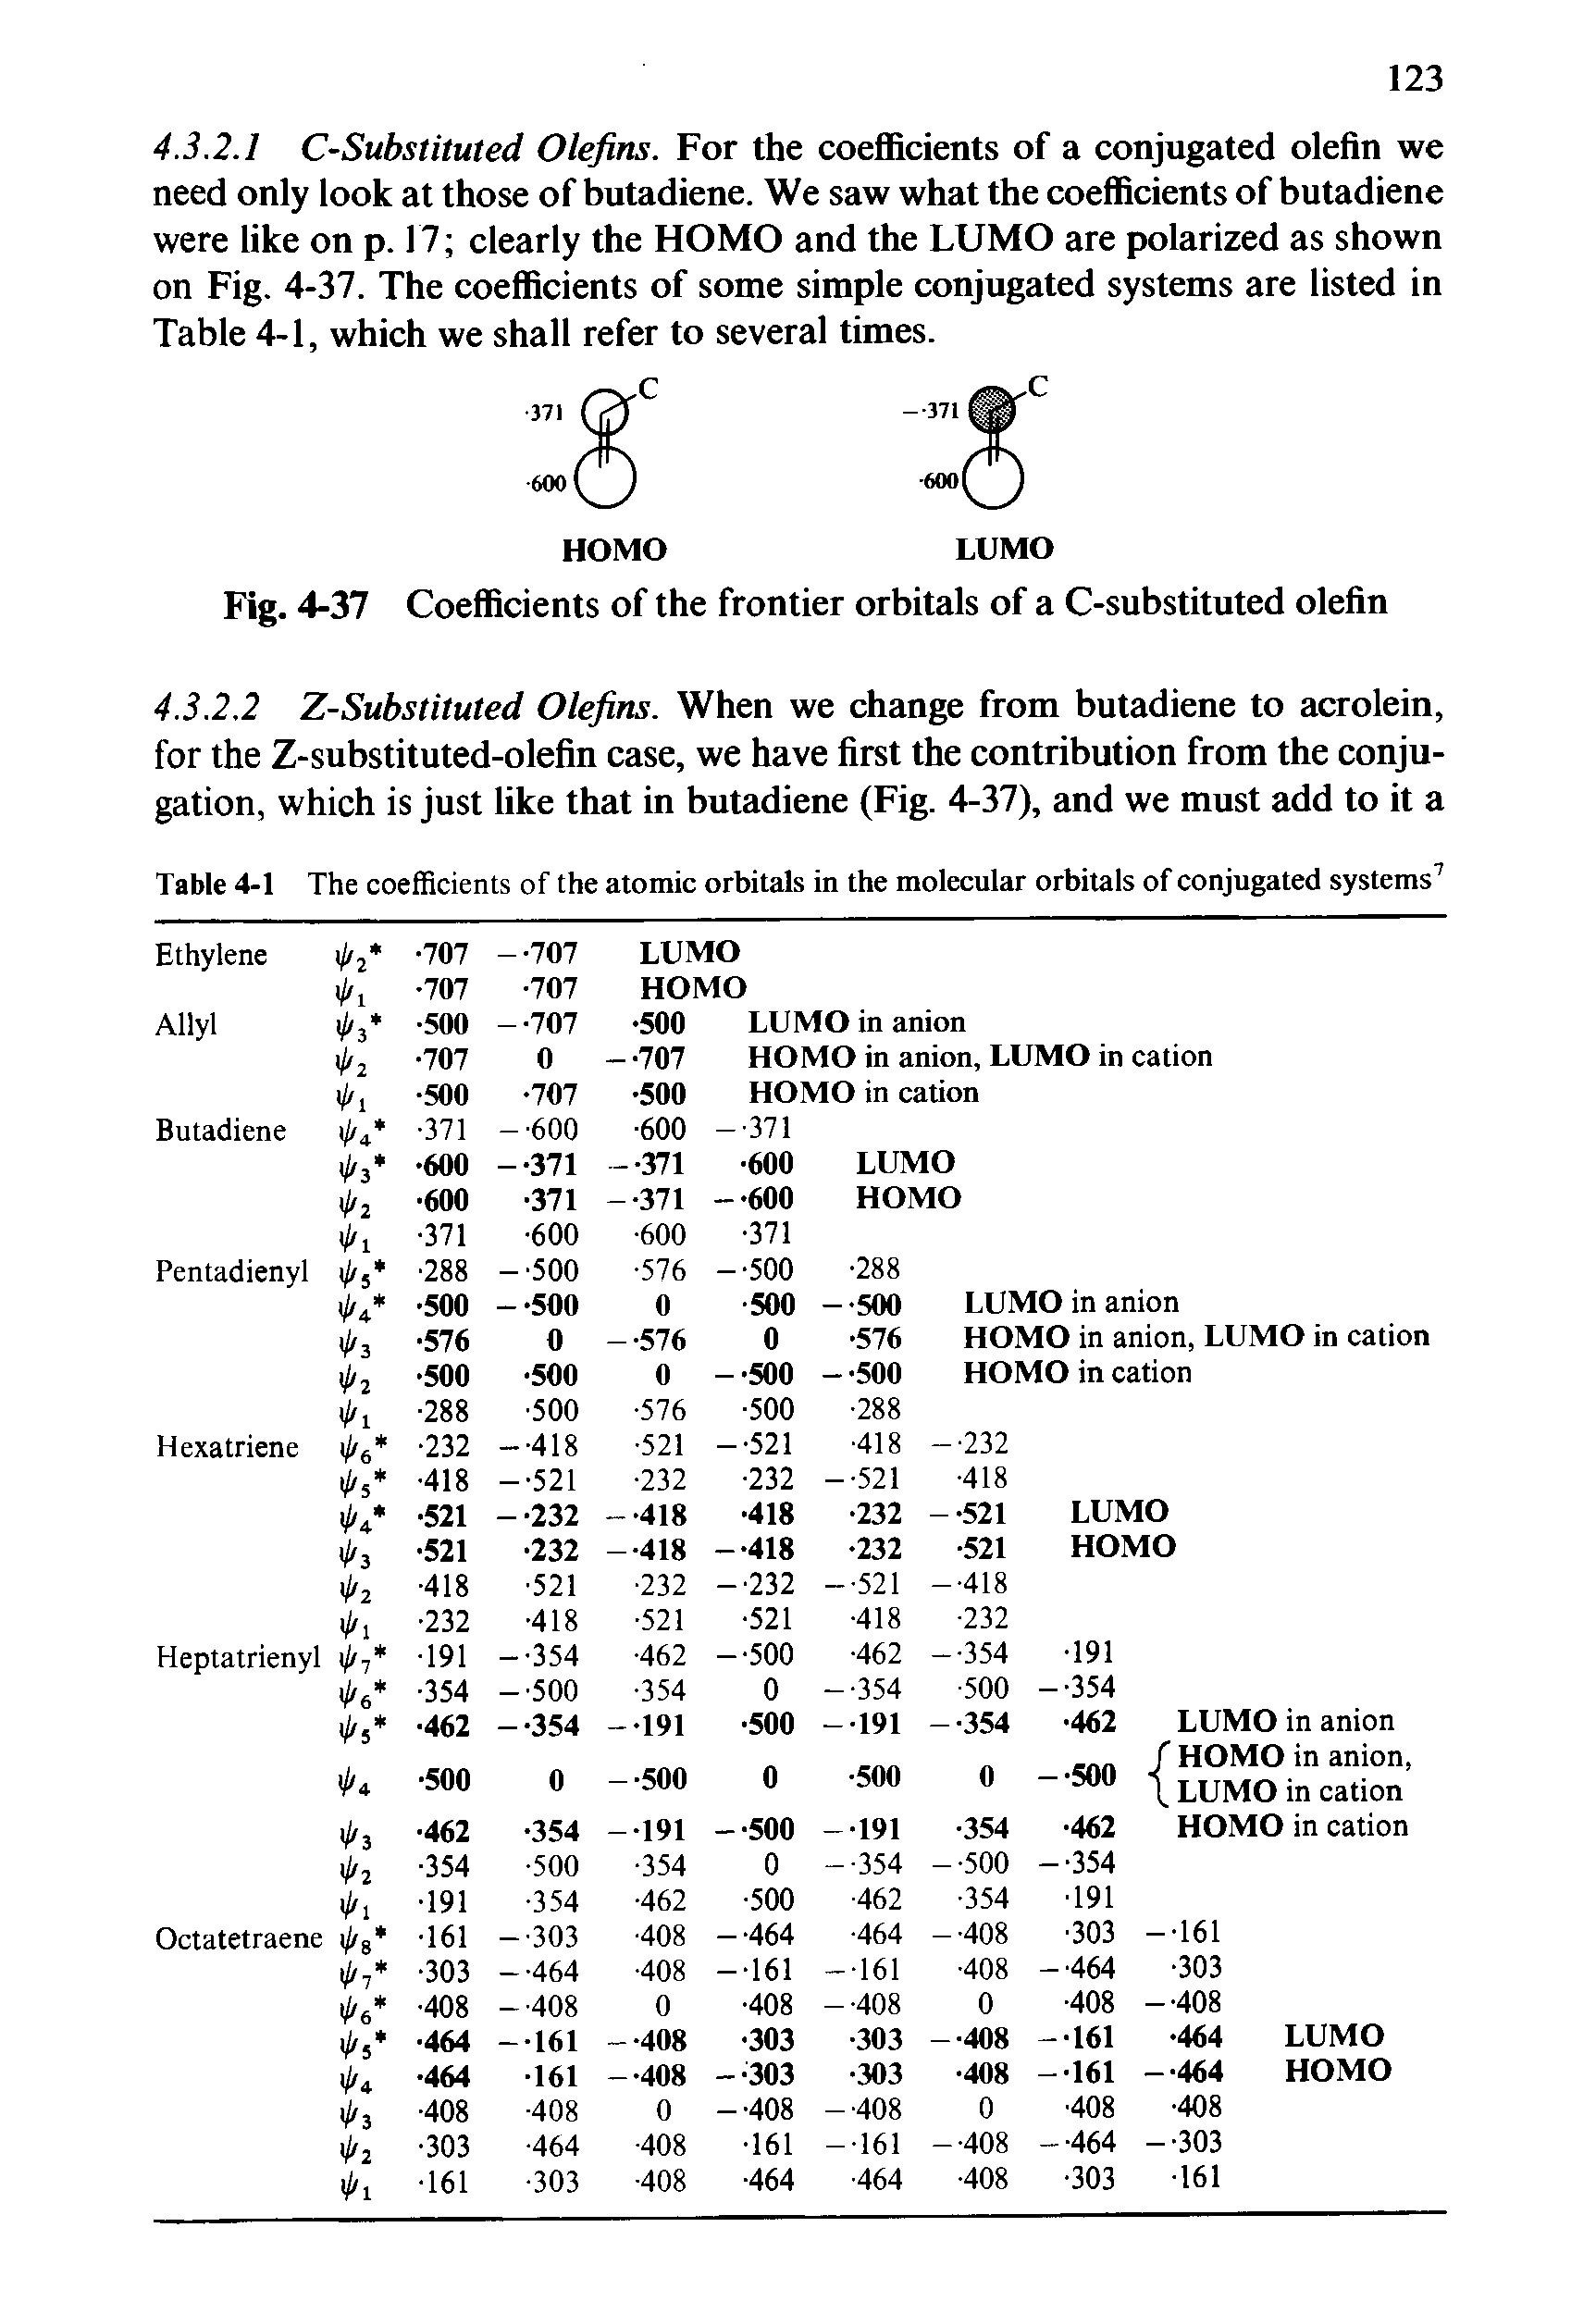 Table 4-1 The coefficients of the atomic orbitals in the molecular orbitals of conjugated systems7...